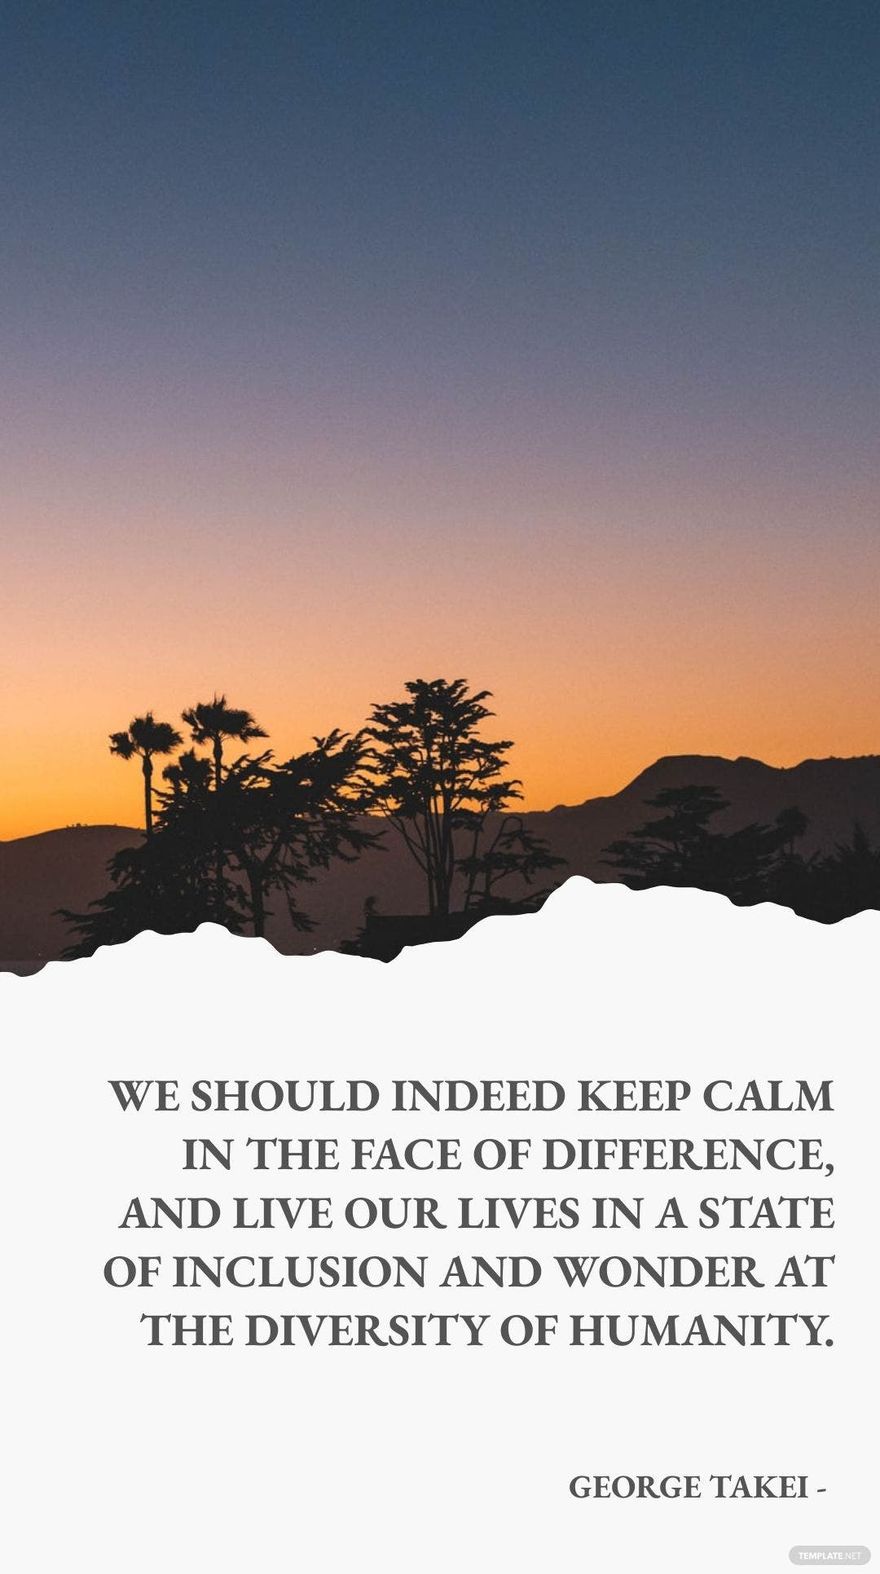 George Takei - We should indeed keep calm in the face of difference, and live our lives in a state of inclusion and wonder at the diversity of humanity. in JPG